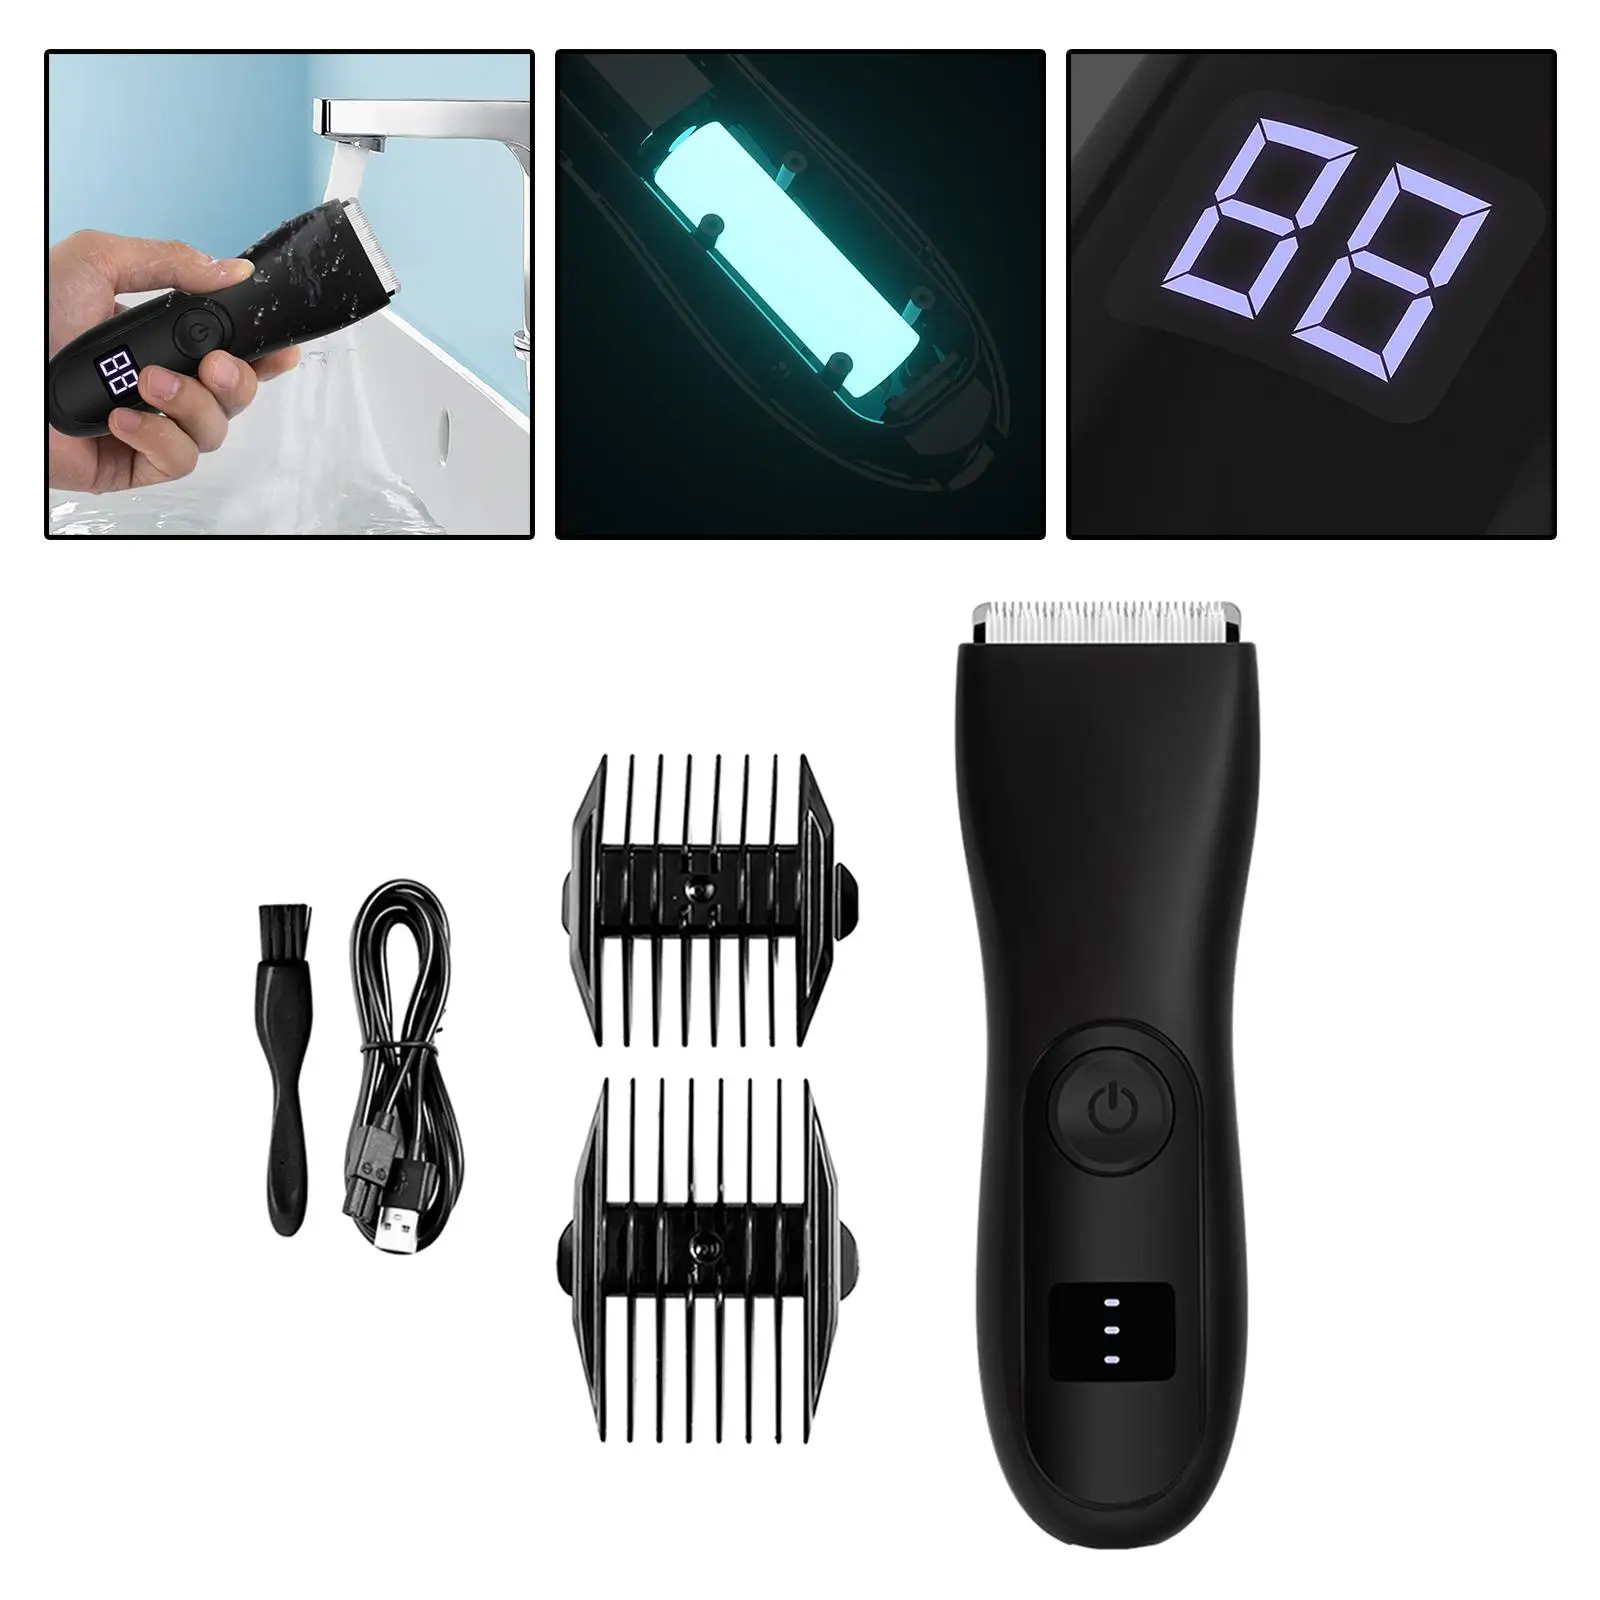 USB Charging Electric hair trimmer Trimmer Body Shaver Hair Remover with Guide Combs Ceramic Blades for Chest Body beard